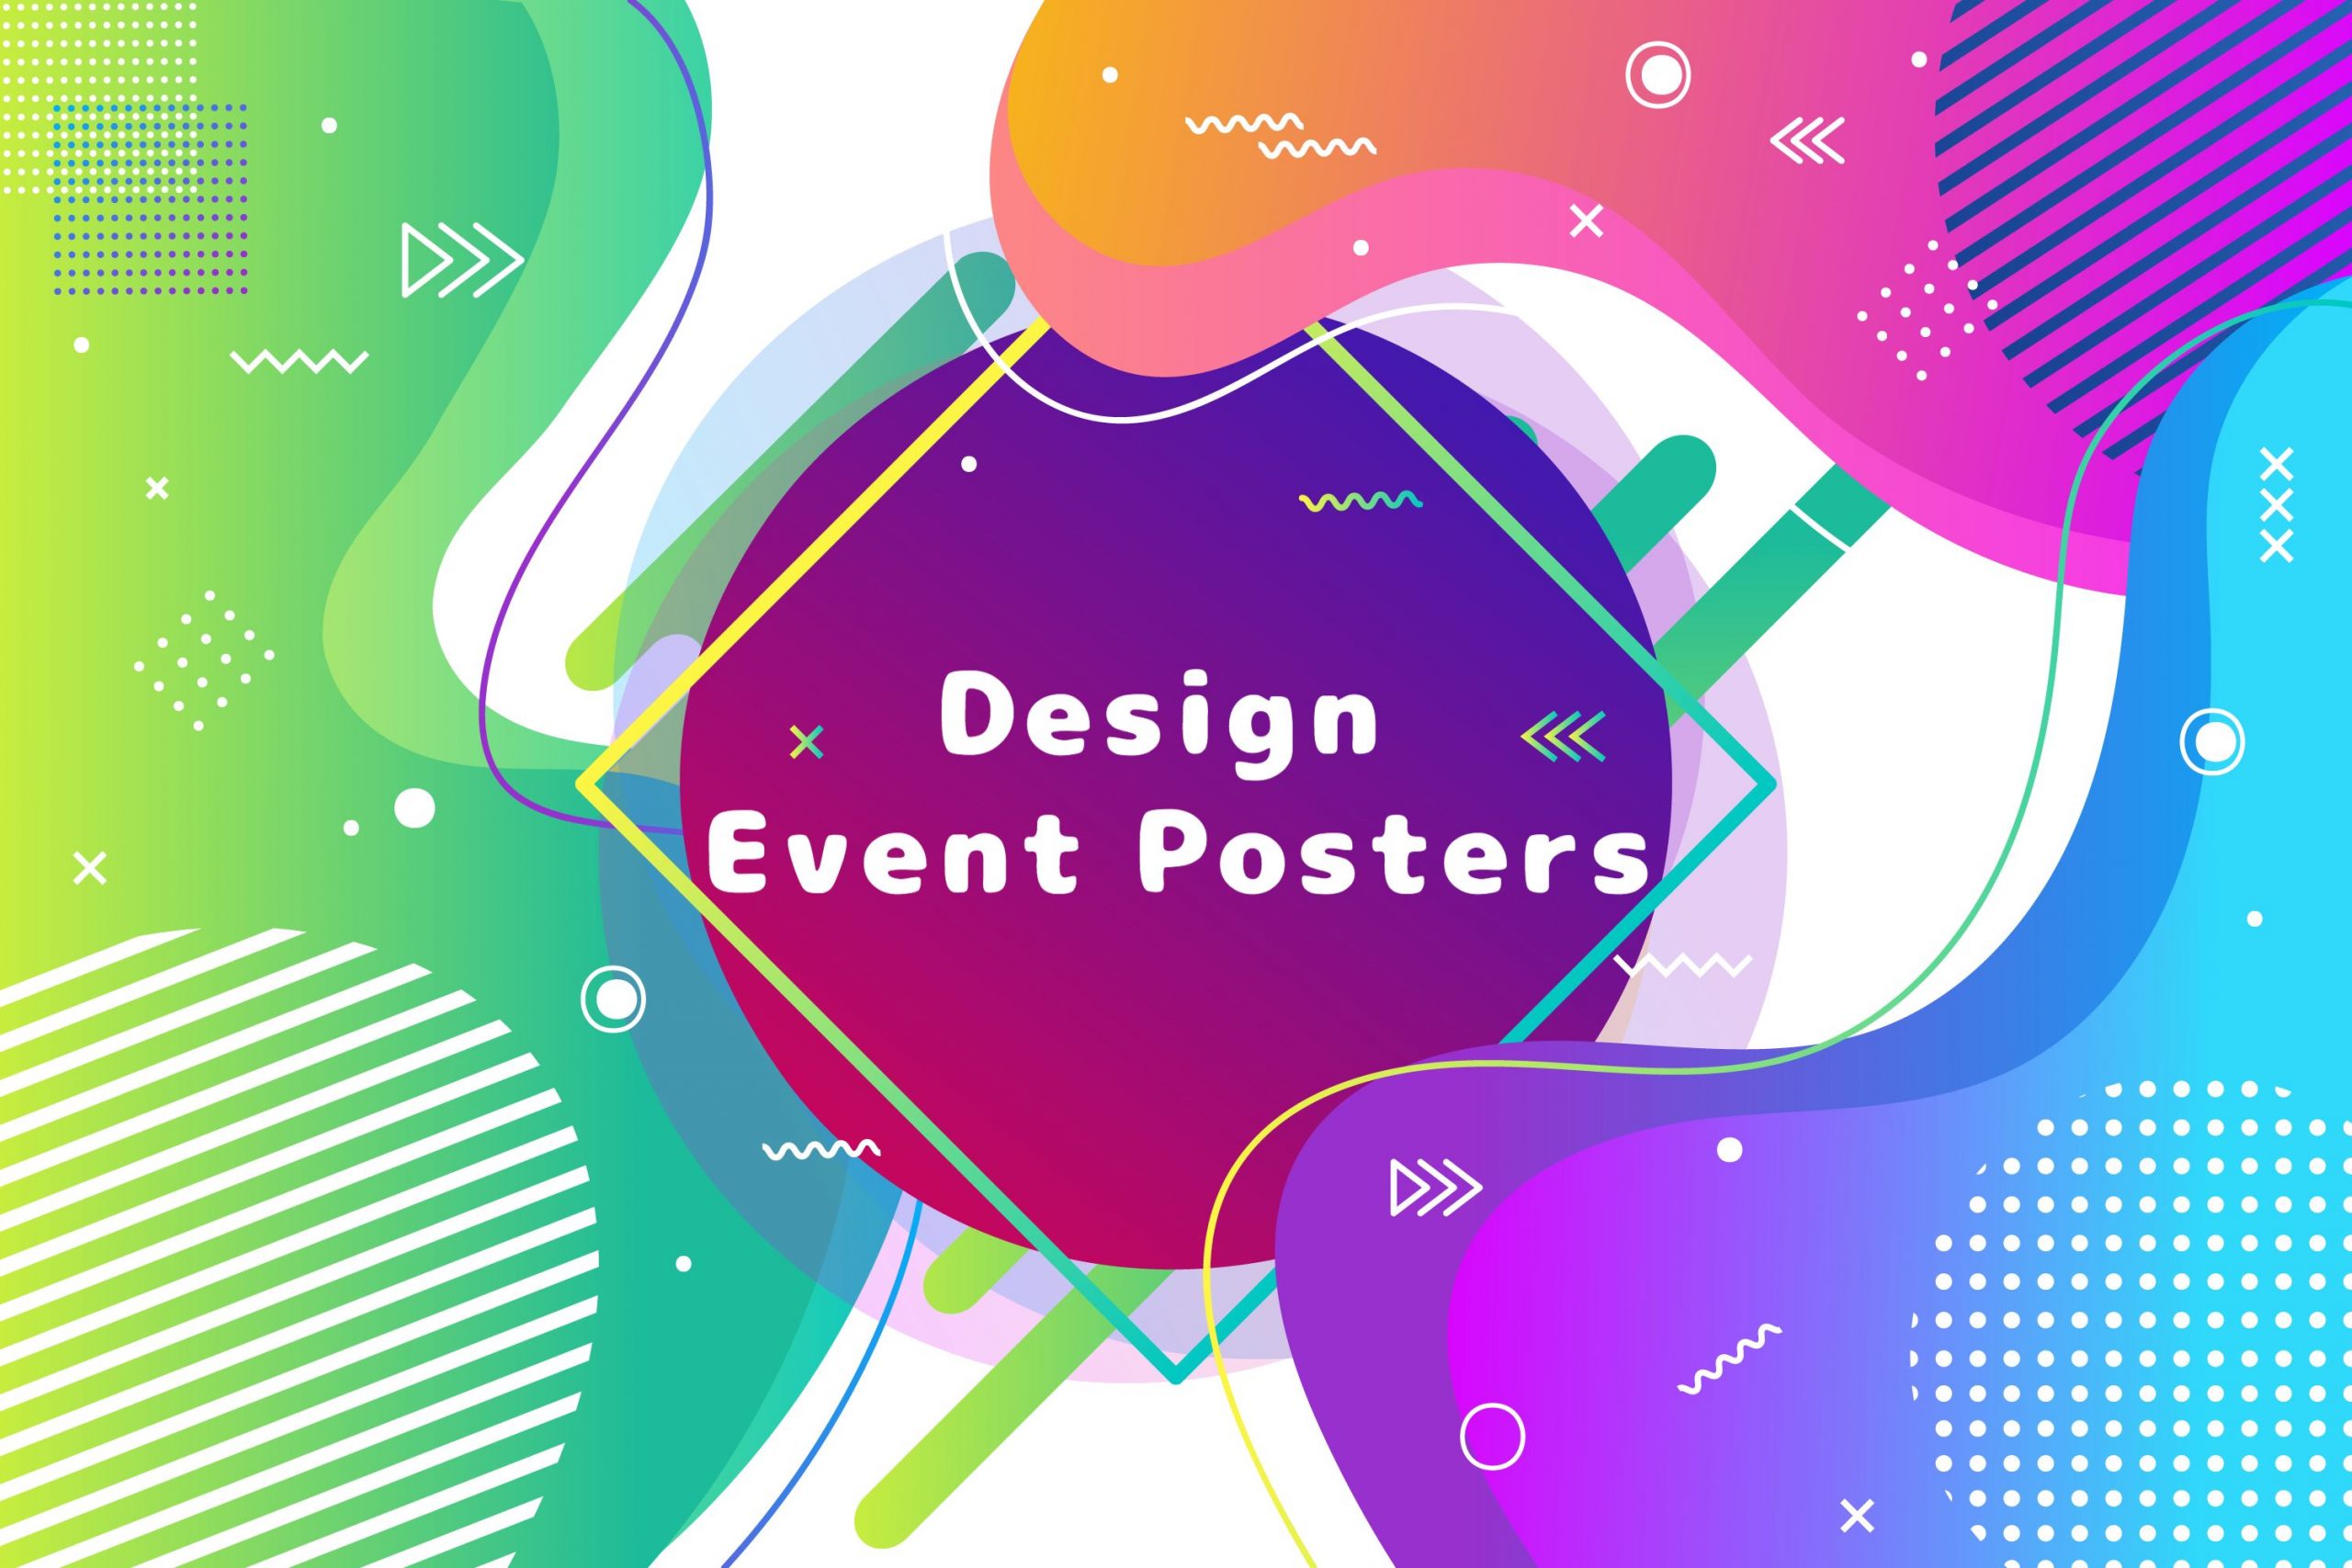 How to Design Event Posters: 10 Useful Tips